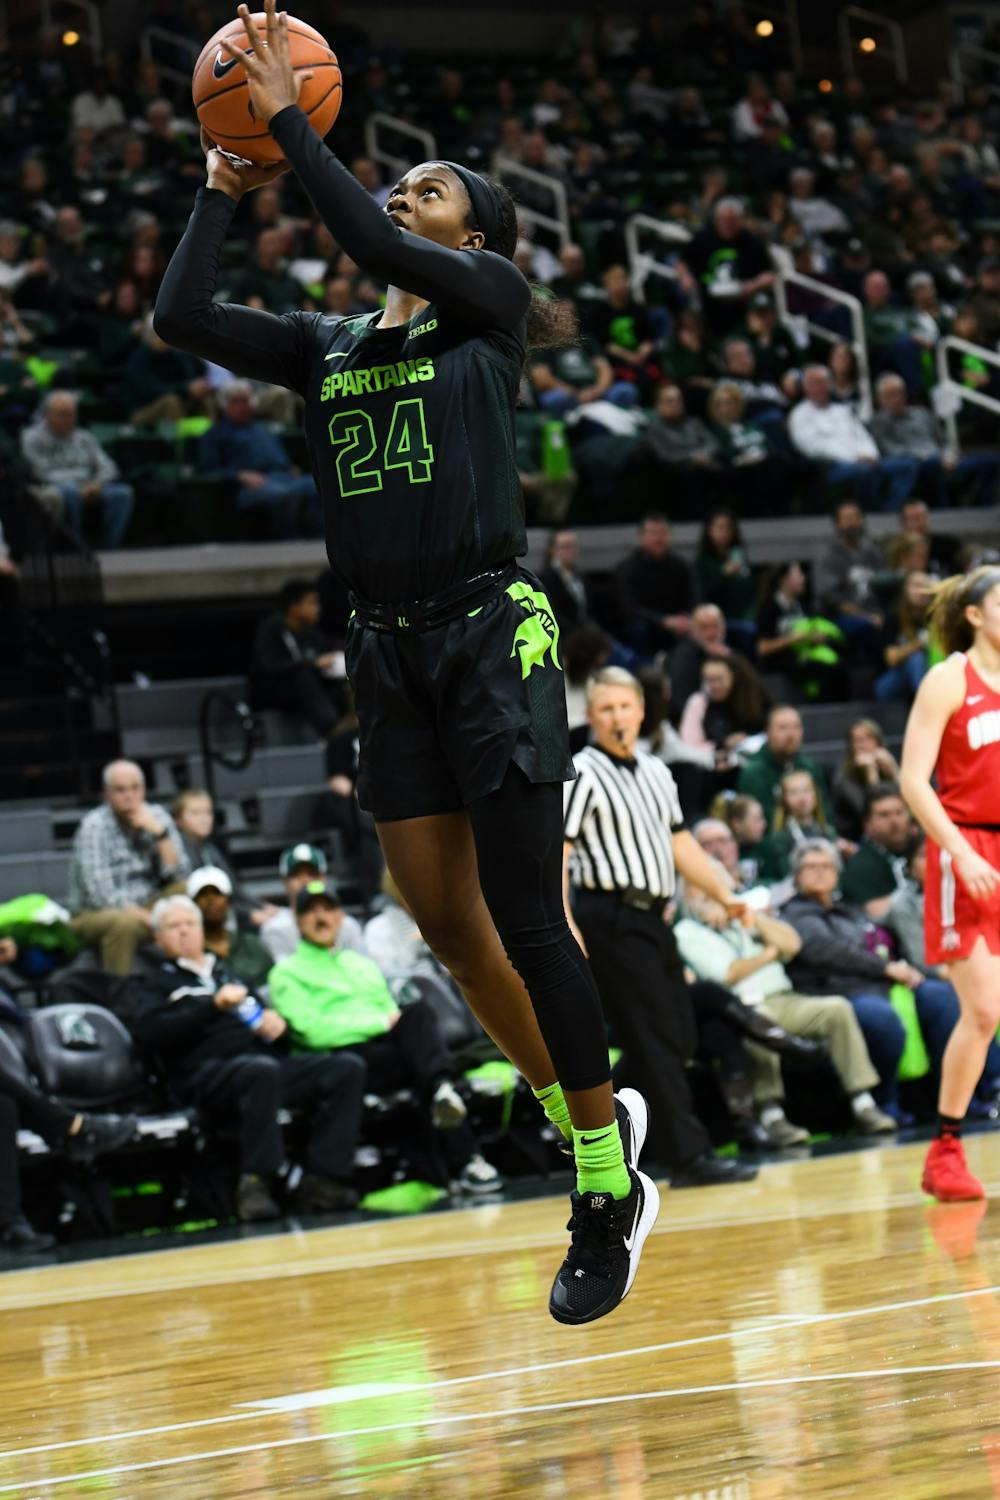 Sophomore Guard  Nia Clouden (24) makes a shot during the women's basketball game against Ohio State on January 16, 2019. The Spartans defeated the Buckeyes 68-65. 